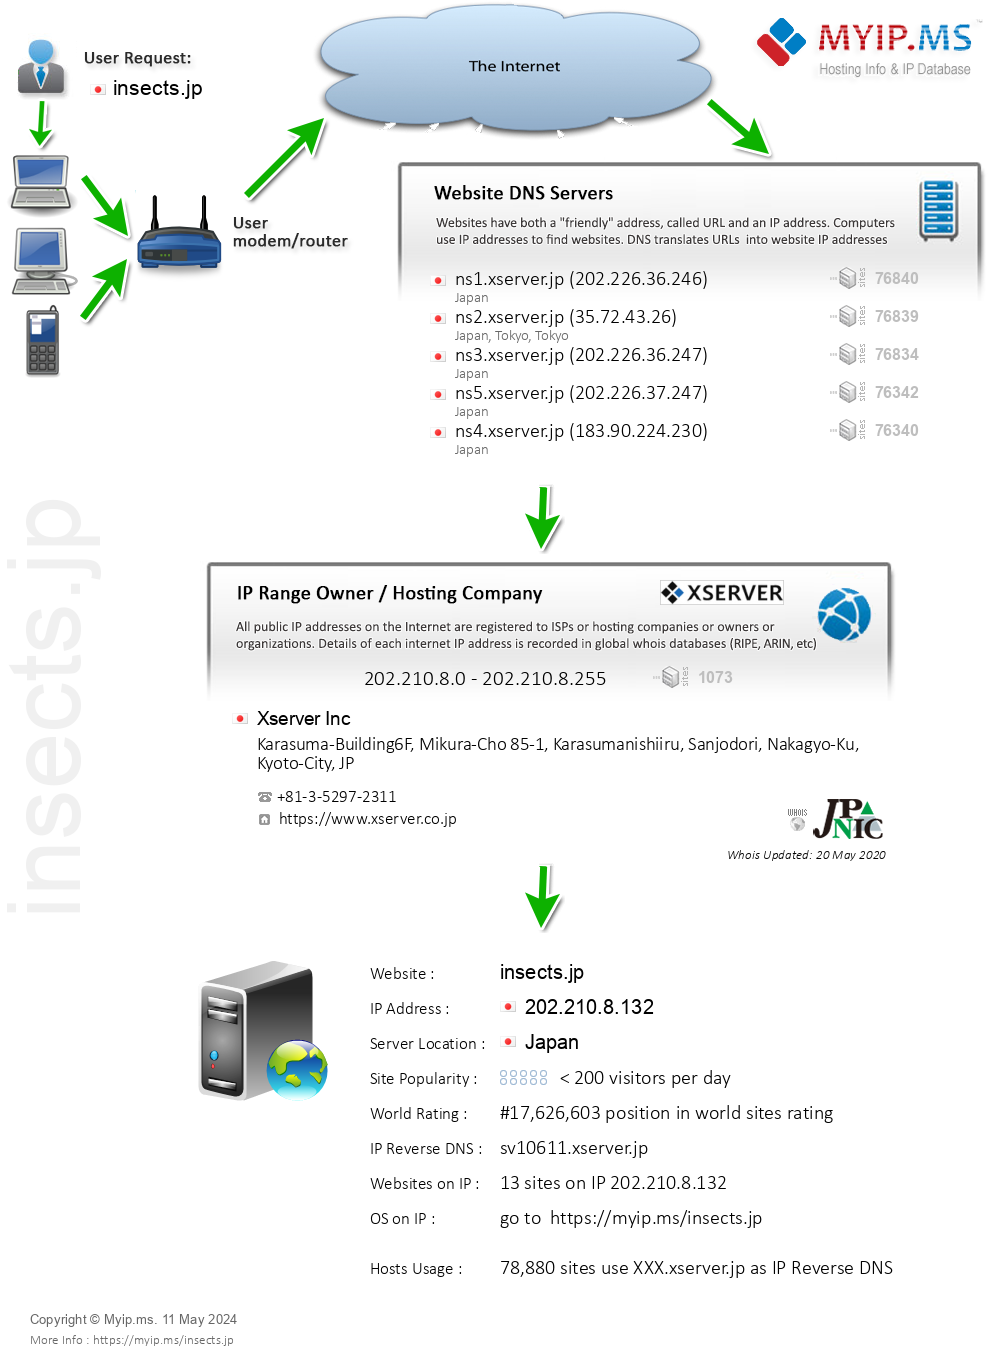 Insects.jp - Website Hosting Visual IP Diagram